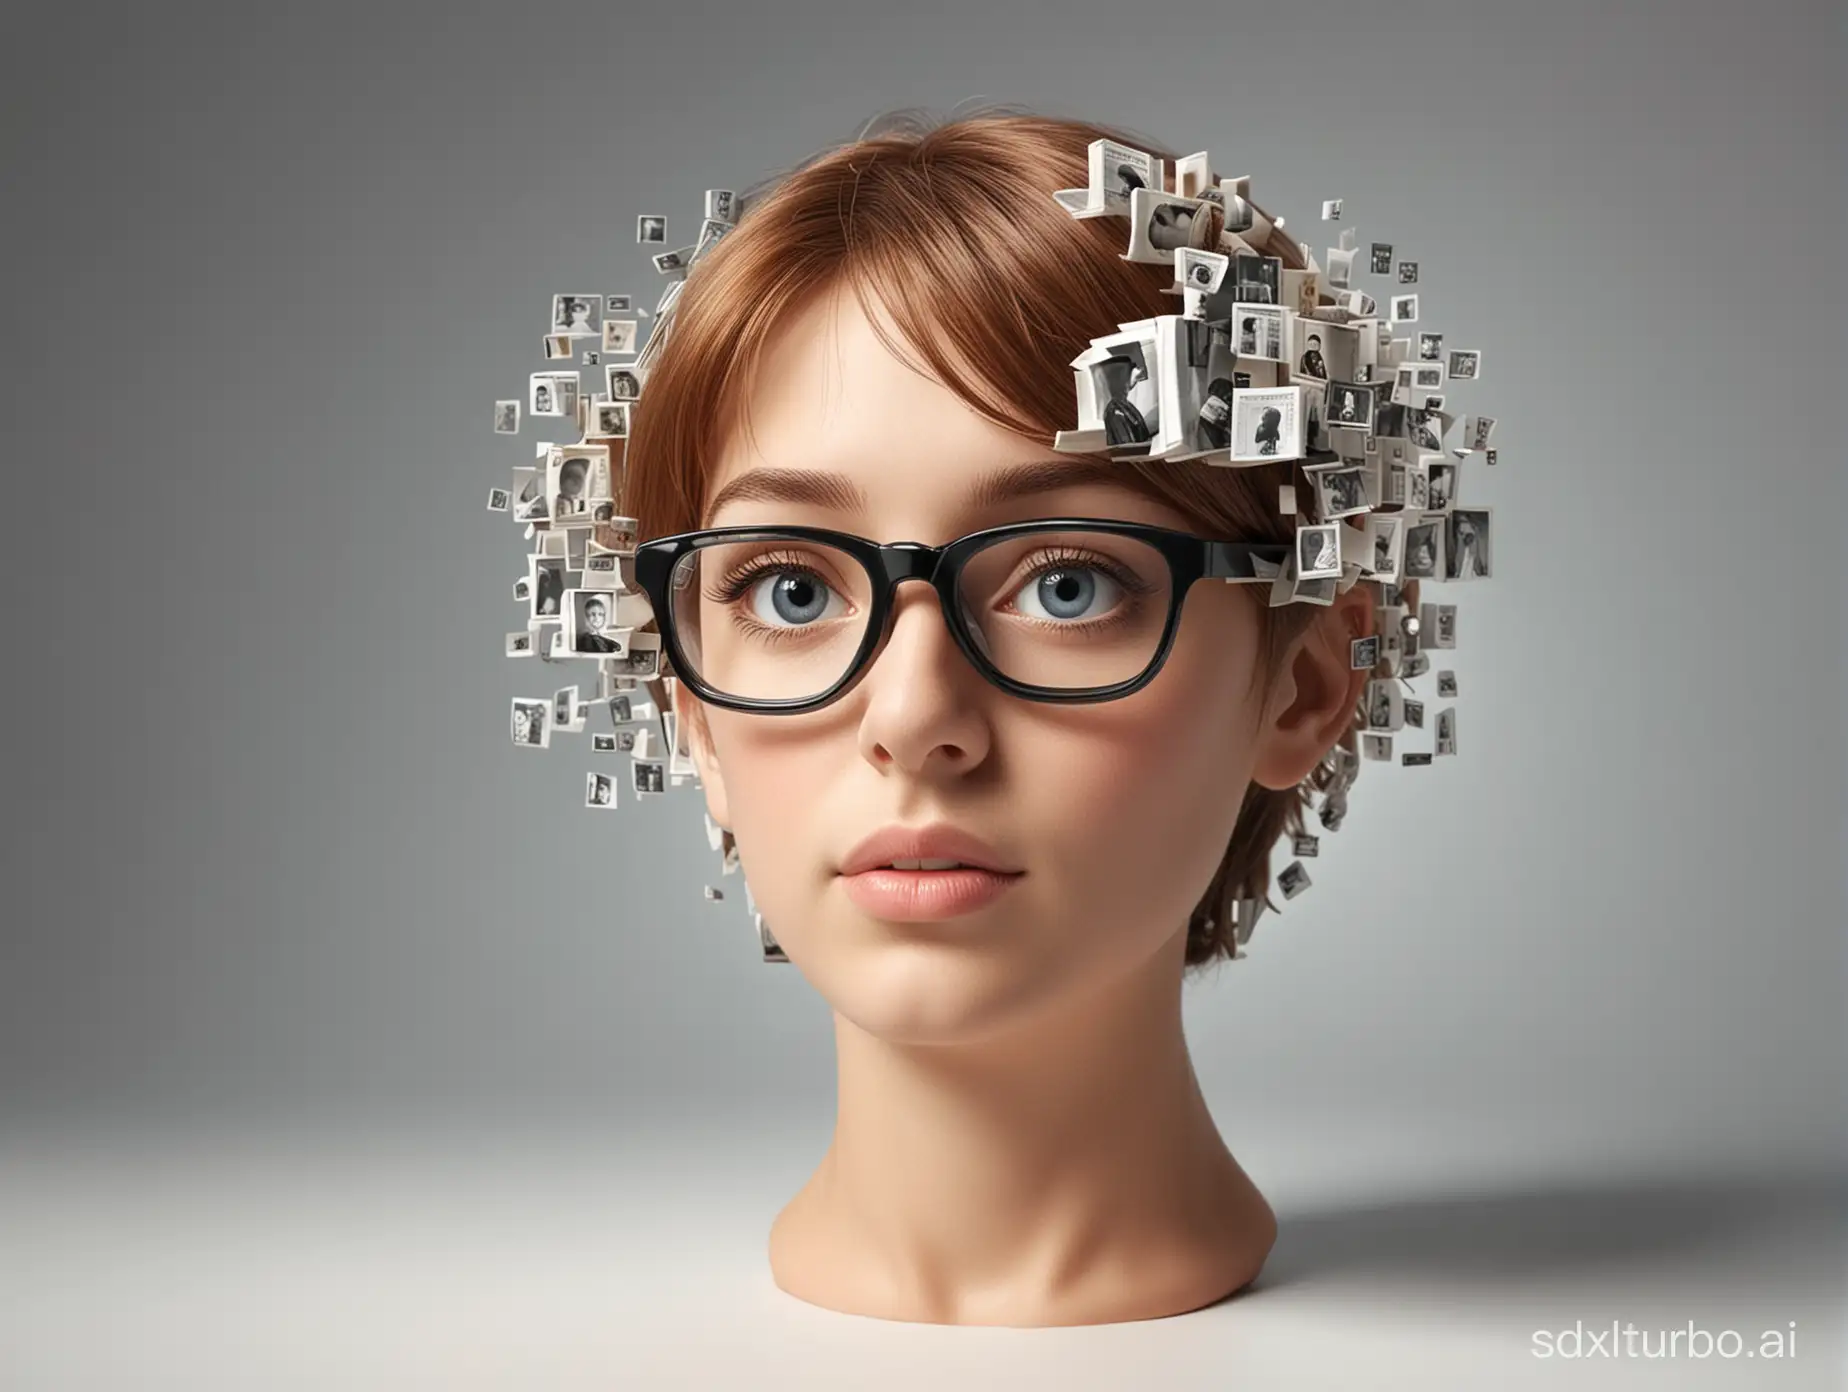 Imagine a three-dimensional picture of a person learning the French language.